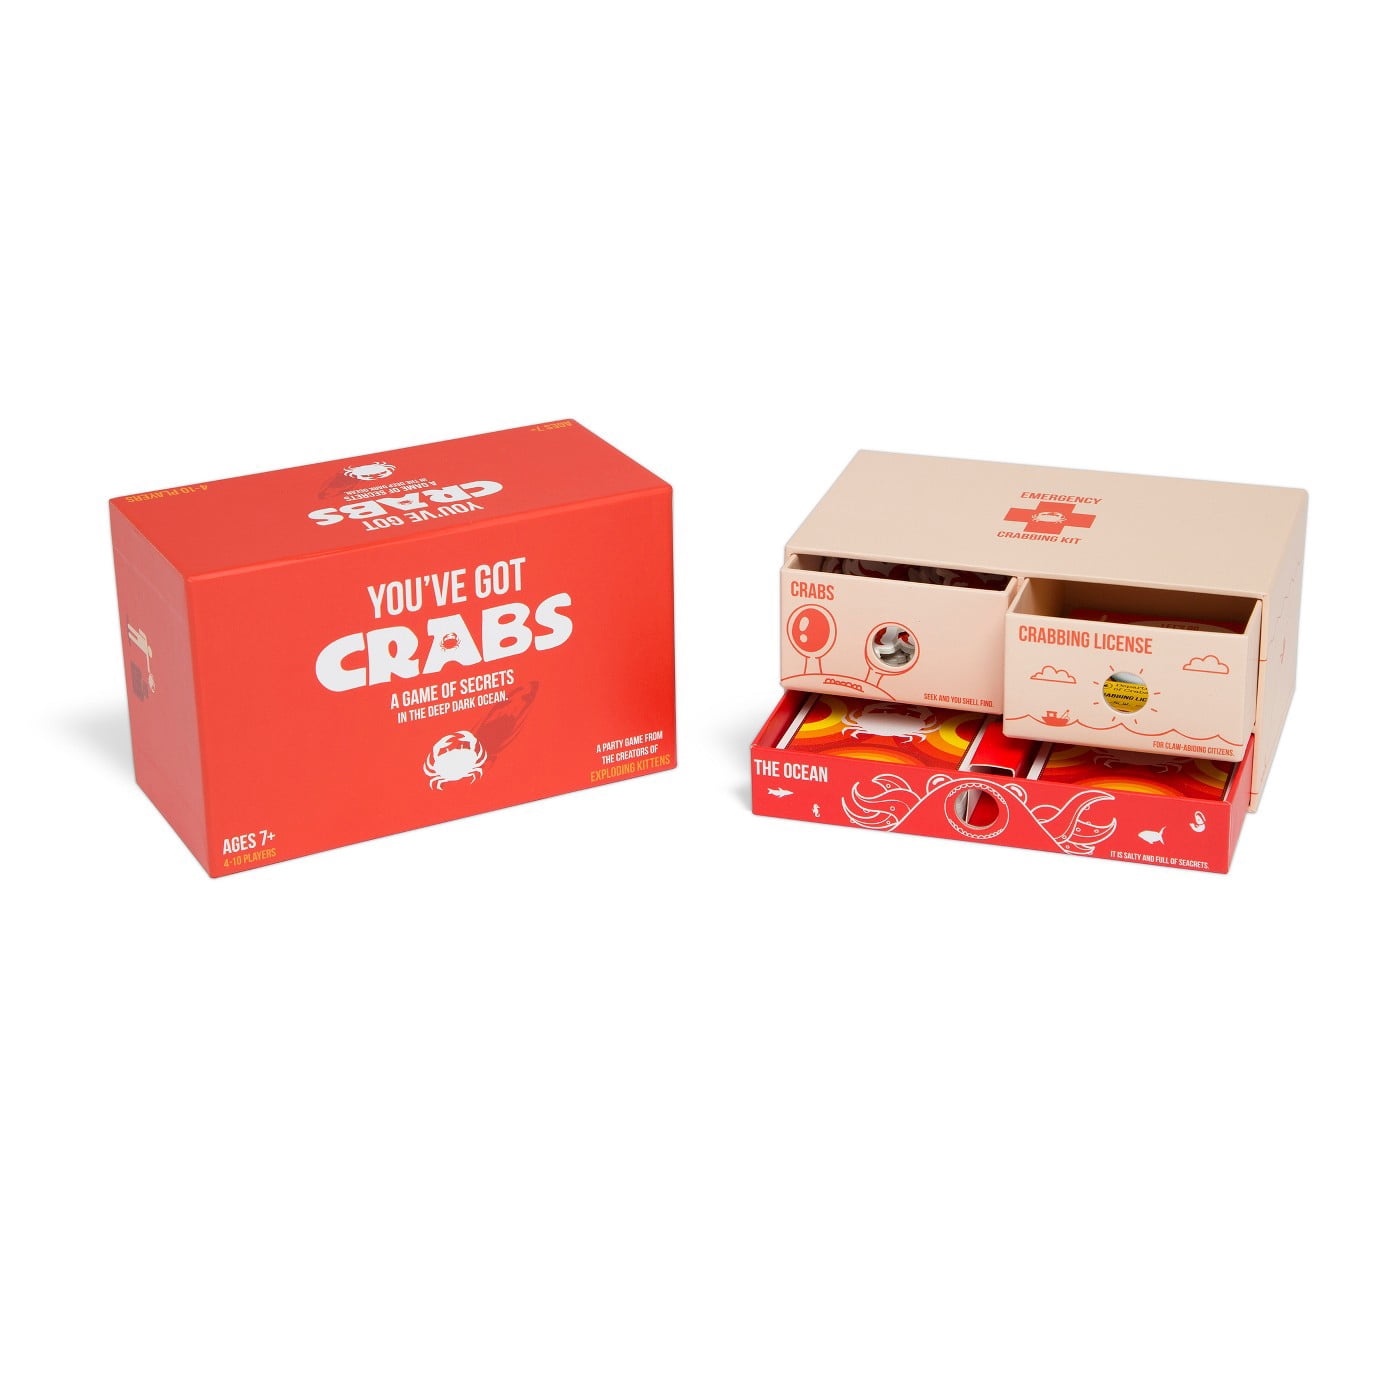 You've Got Crabs Imitation Crab EXPANSION KIT Giant Crab Claw Hands BRAND NEW 